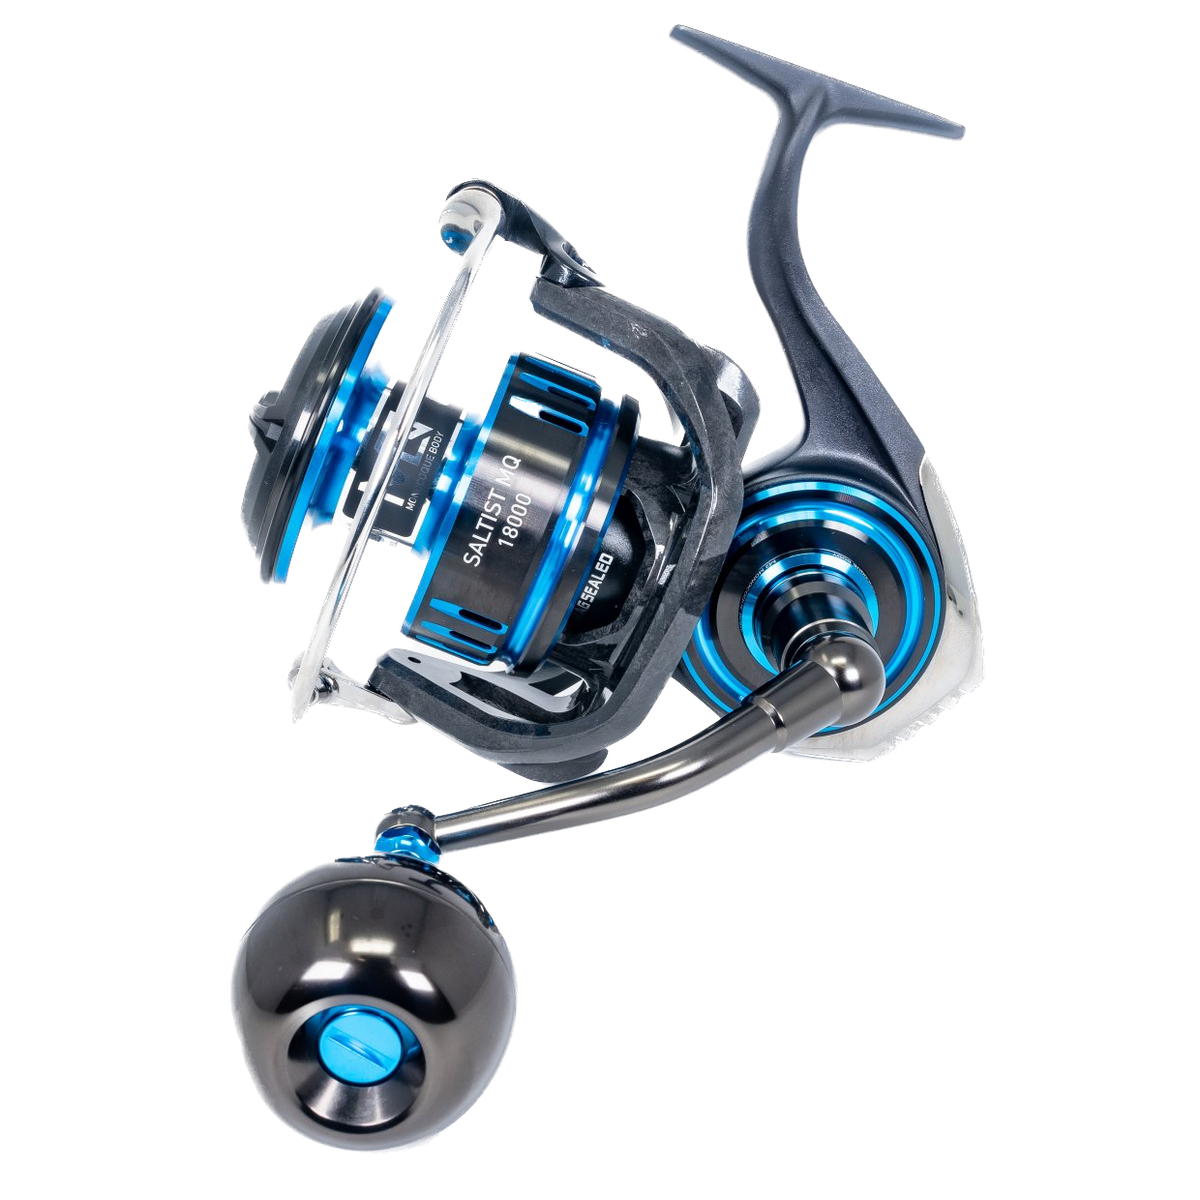 Daiwa's New Eliminator Saltwater Spinning Series - On The Water